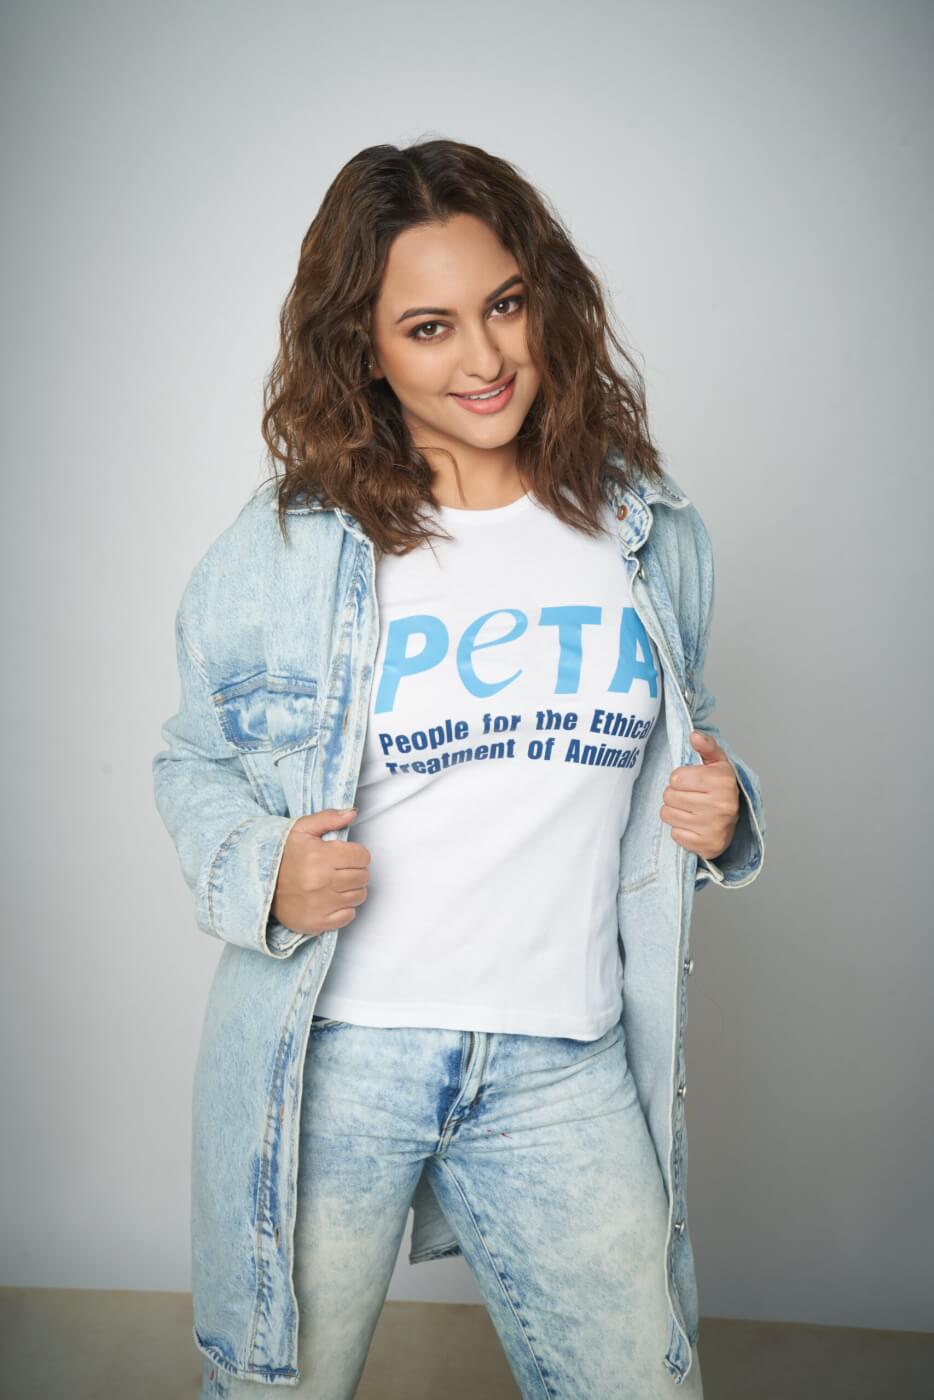 PETA India's Person of the Year Is … Sonakshi Sinha!